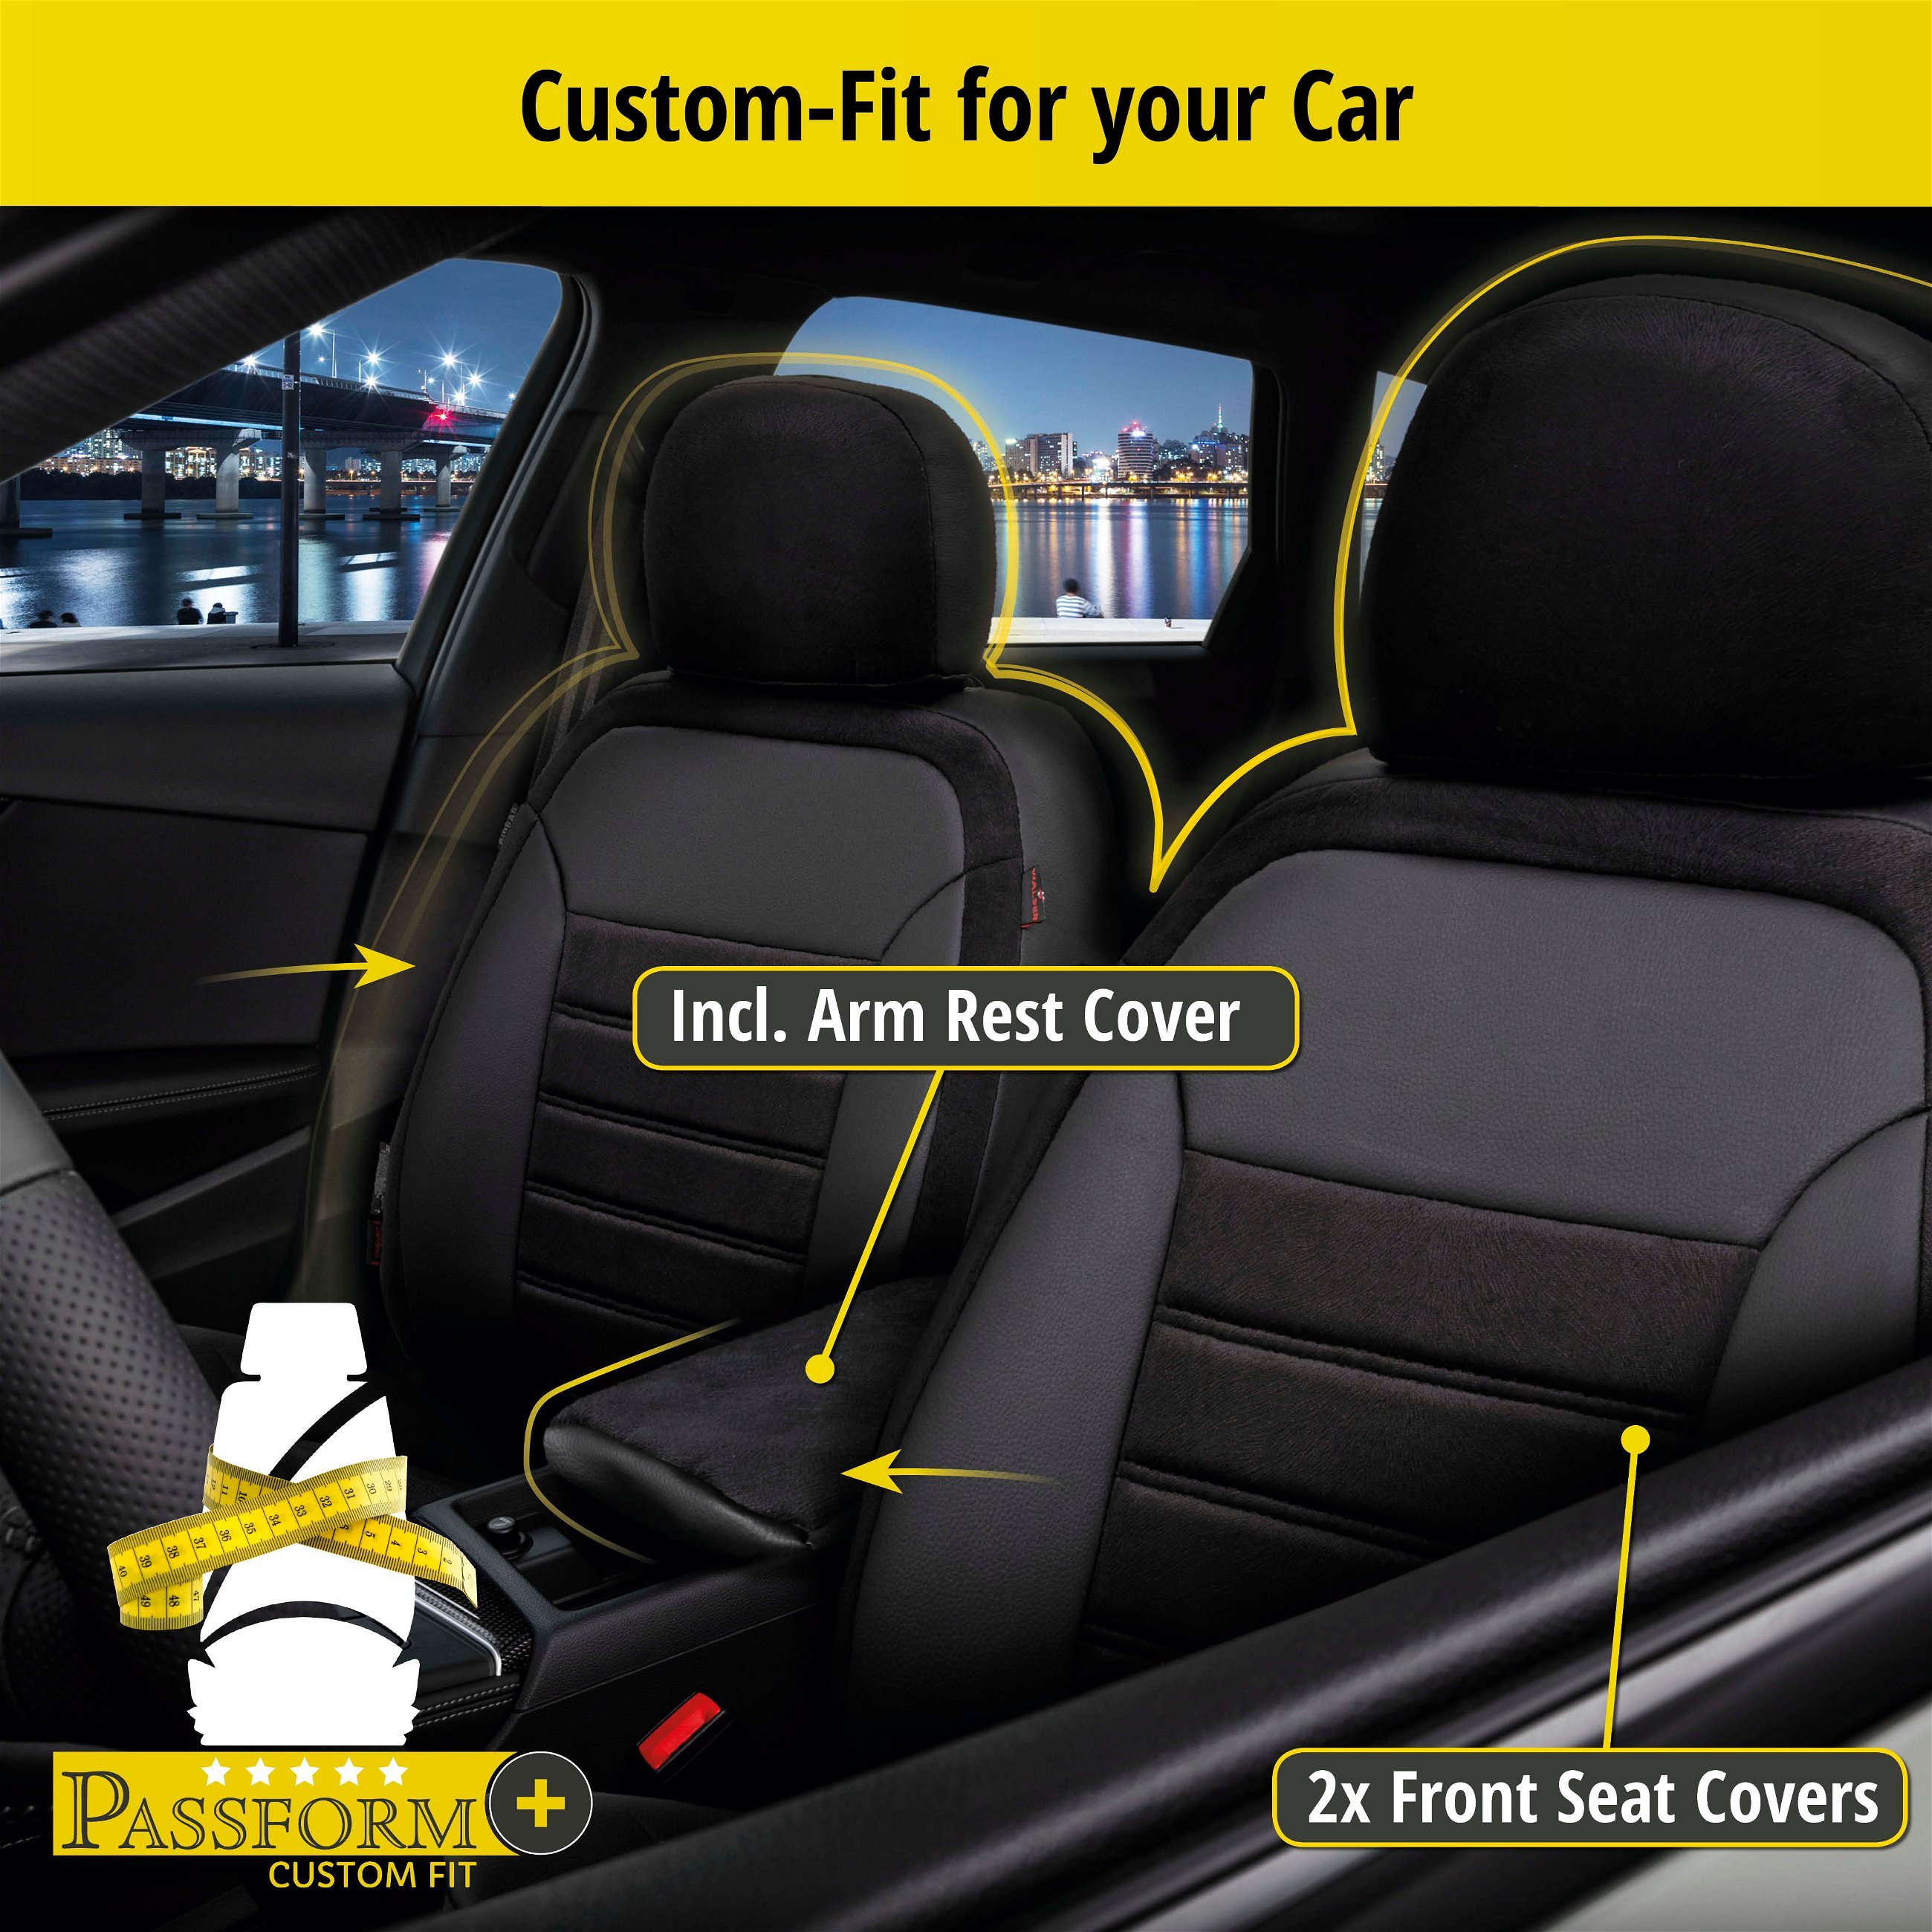 Seat Cover Bari for VW Caravelle VI 04/2015 -Today, 2 seat covers for normal seats